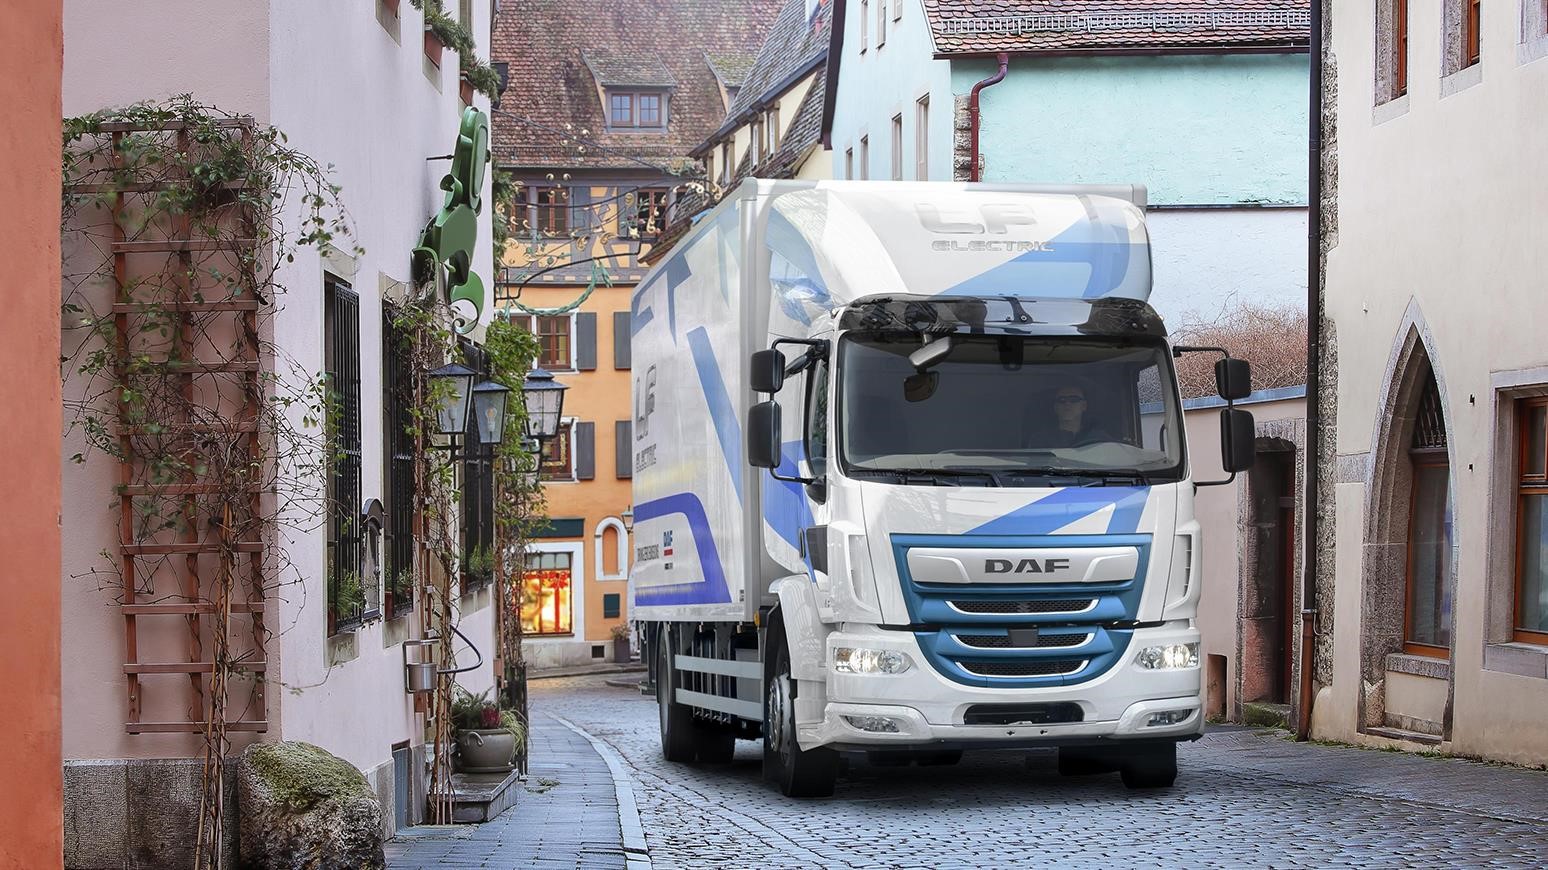 DAF Introduces New LF Electric Zero-Emission Truck For Urban Distribution Applications